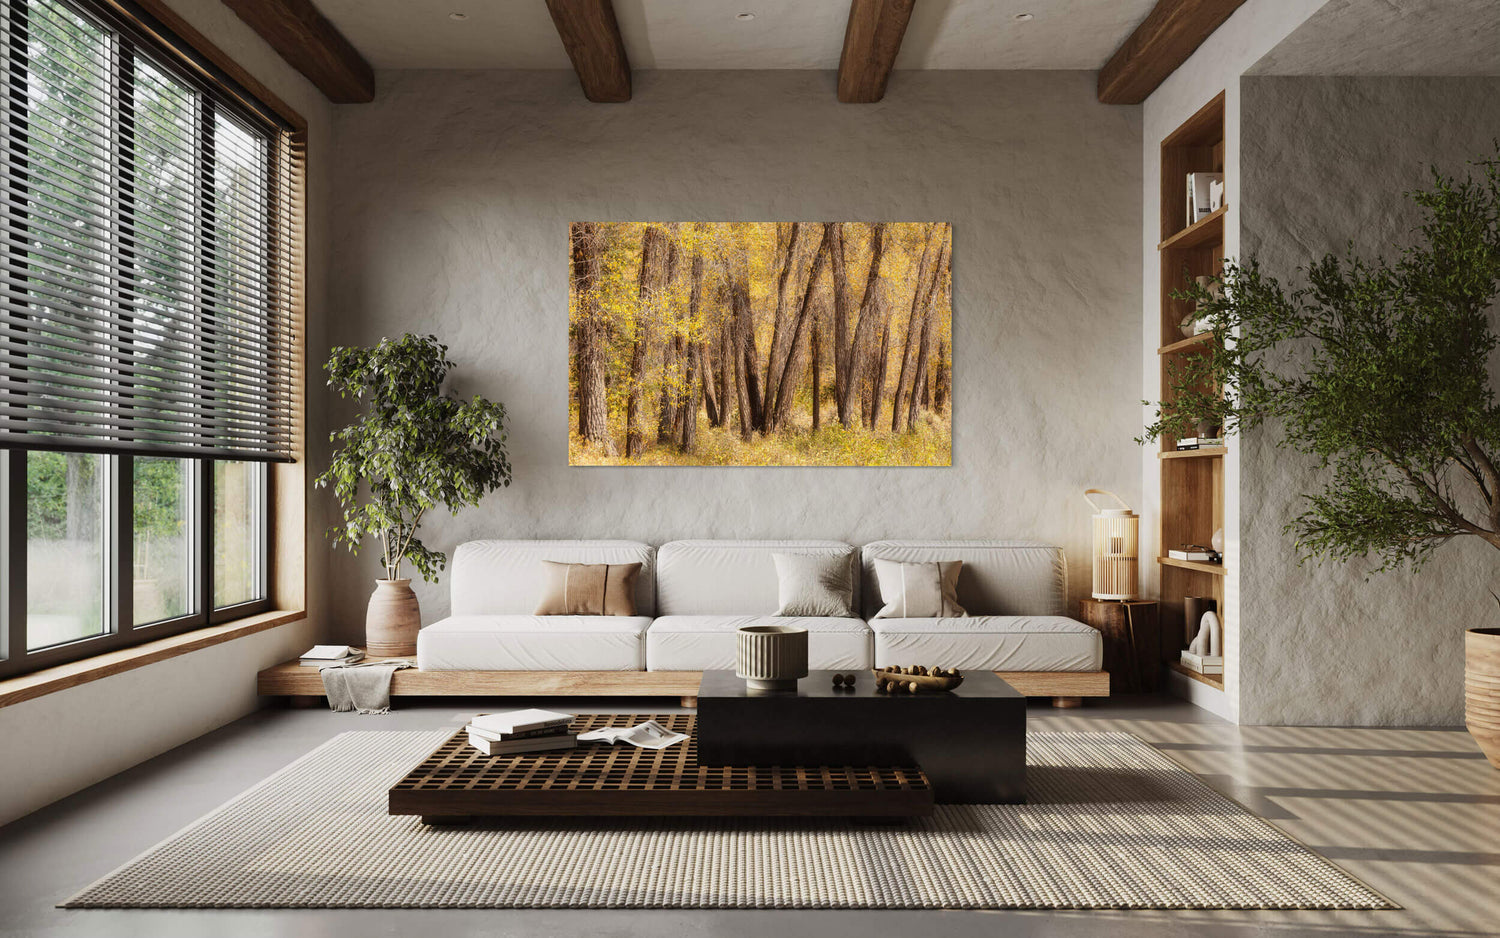 A piece of Jackson Hole art showing fall colors in Grand Teton National Park hangs in a living room.